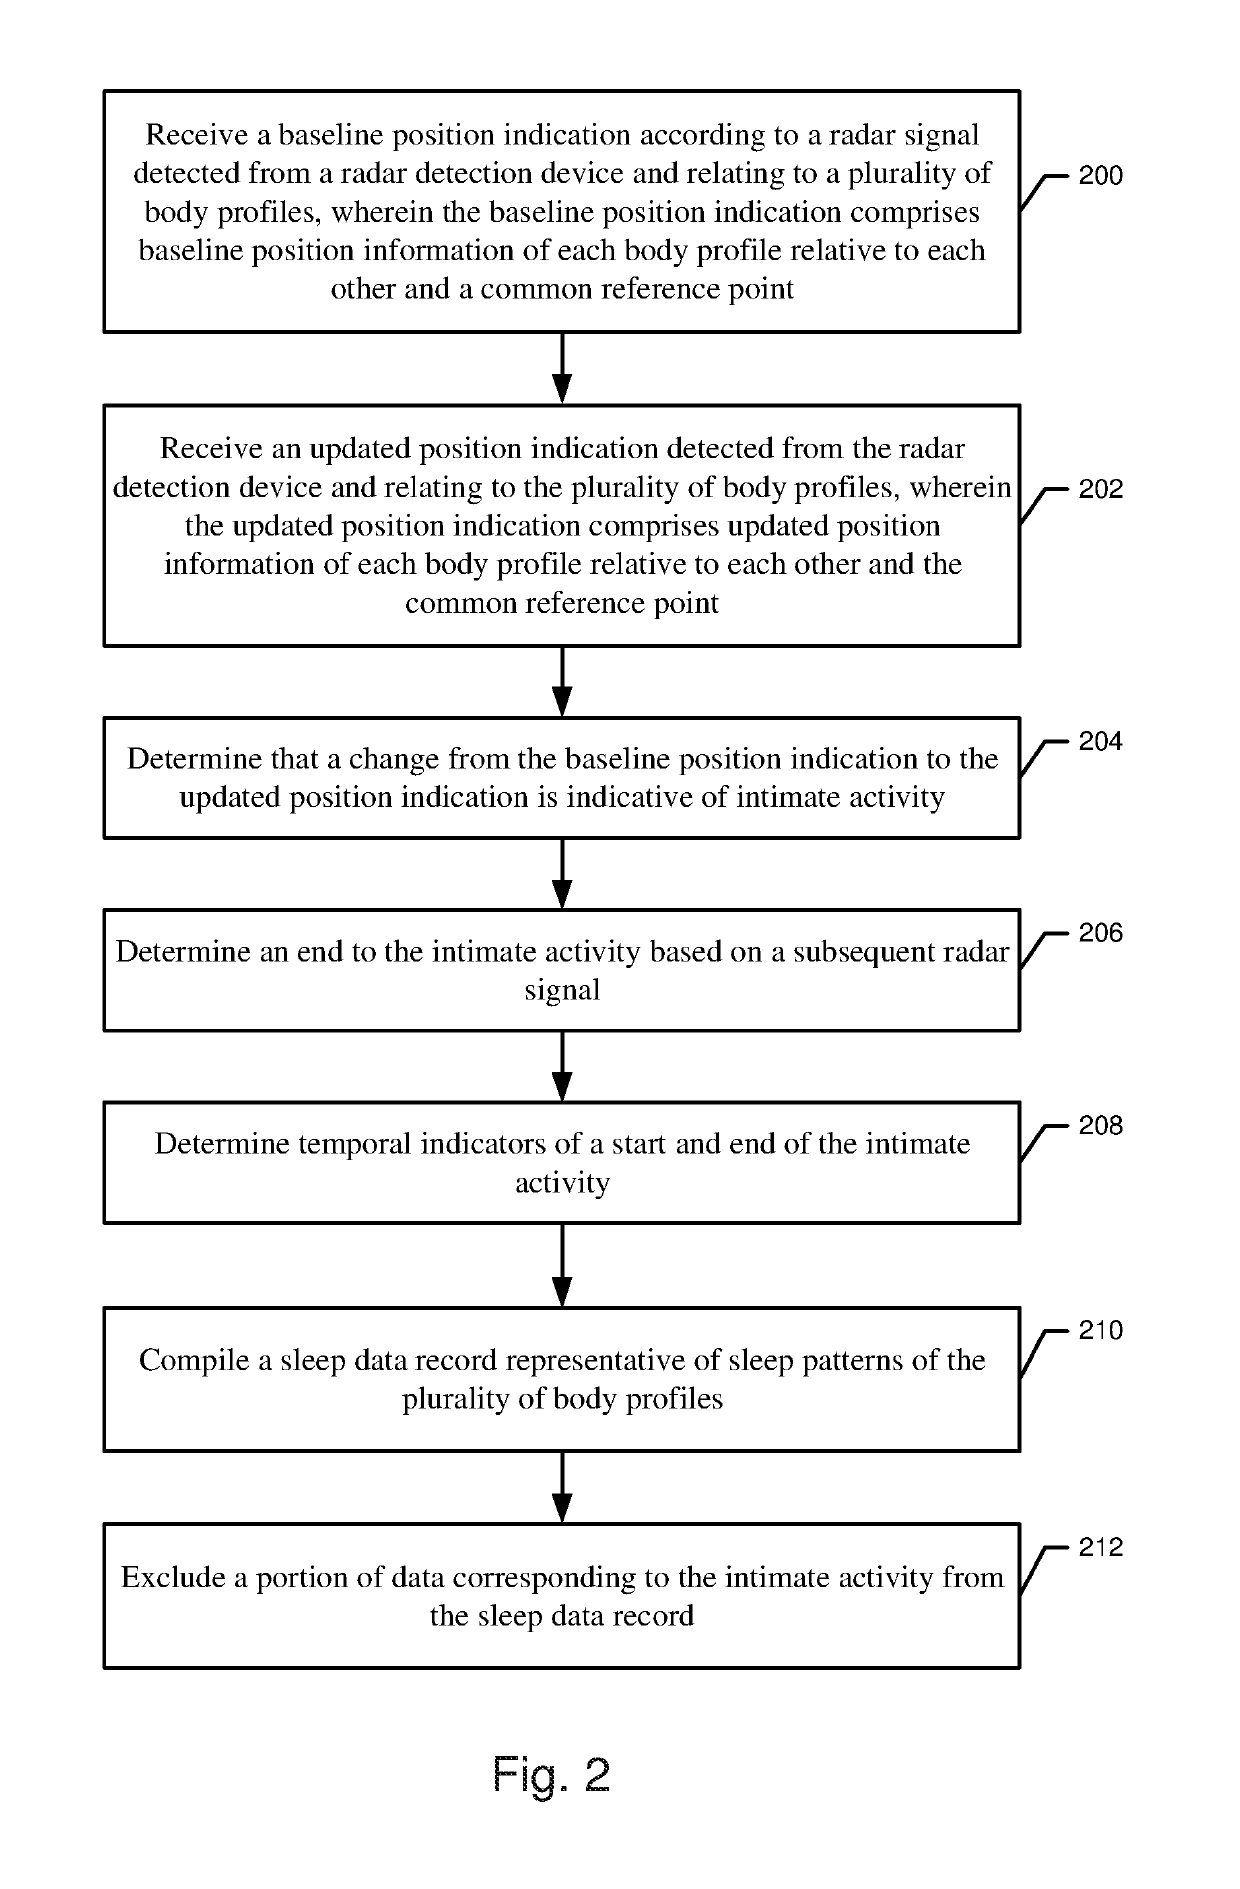 Determining an intimate activity by a detection device